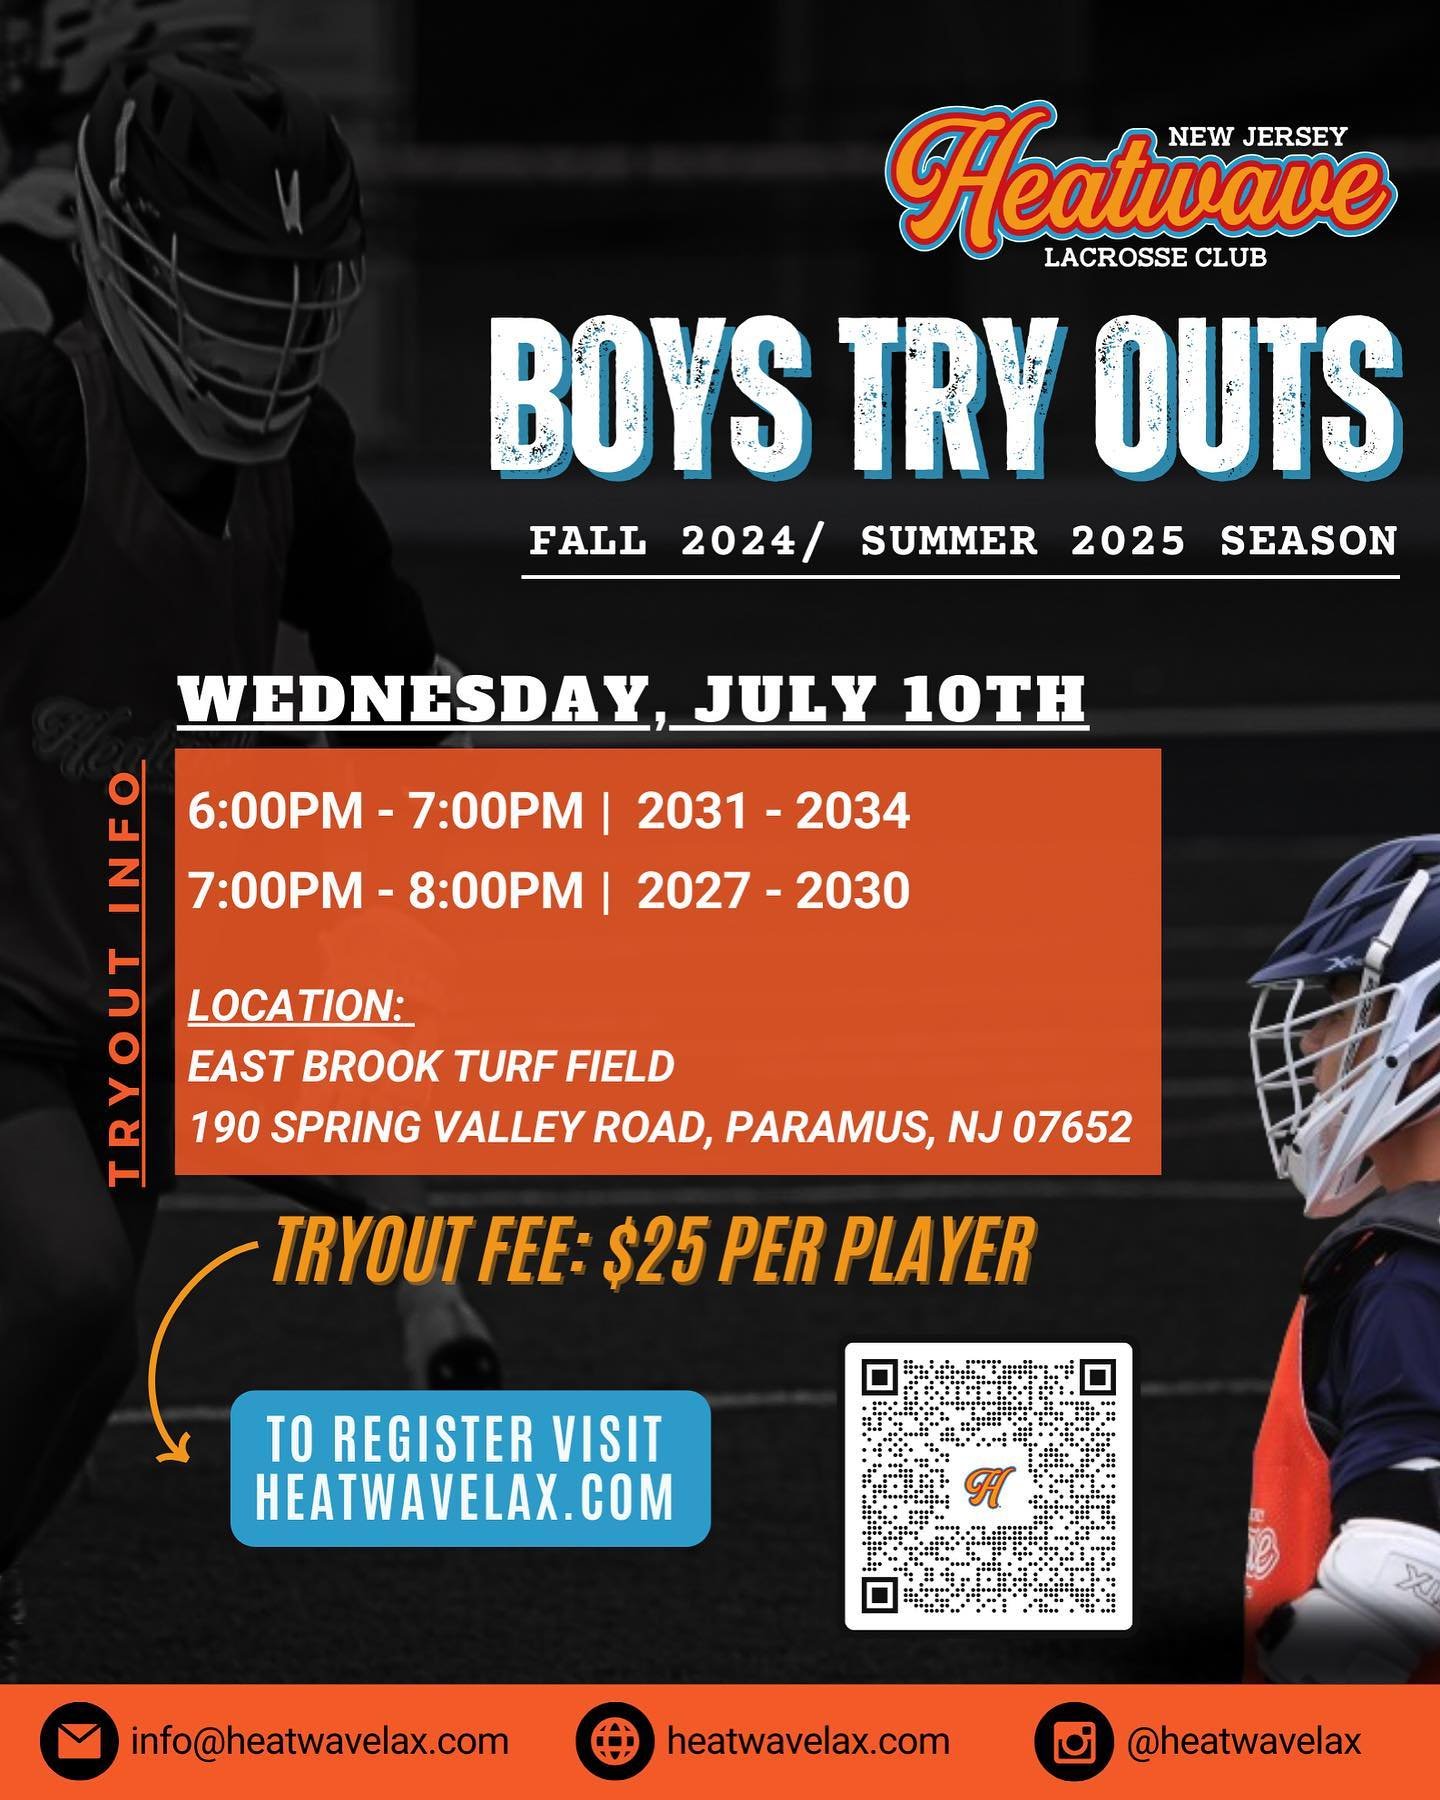 Come try out to be a part of Heatwave Lacrosse&rsquo;s Founding 2025 team 💯🥍 We are excited to offer participants the opportunity to step into the club lacrosse world and play competitive lacrosse at a high level. Making the team means you will be 